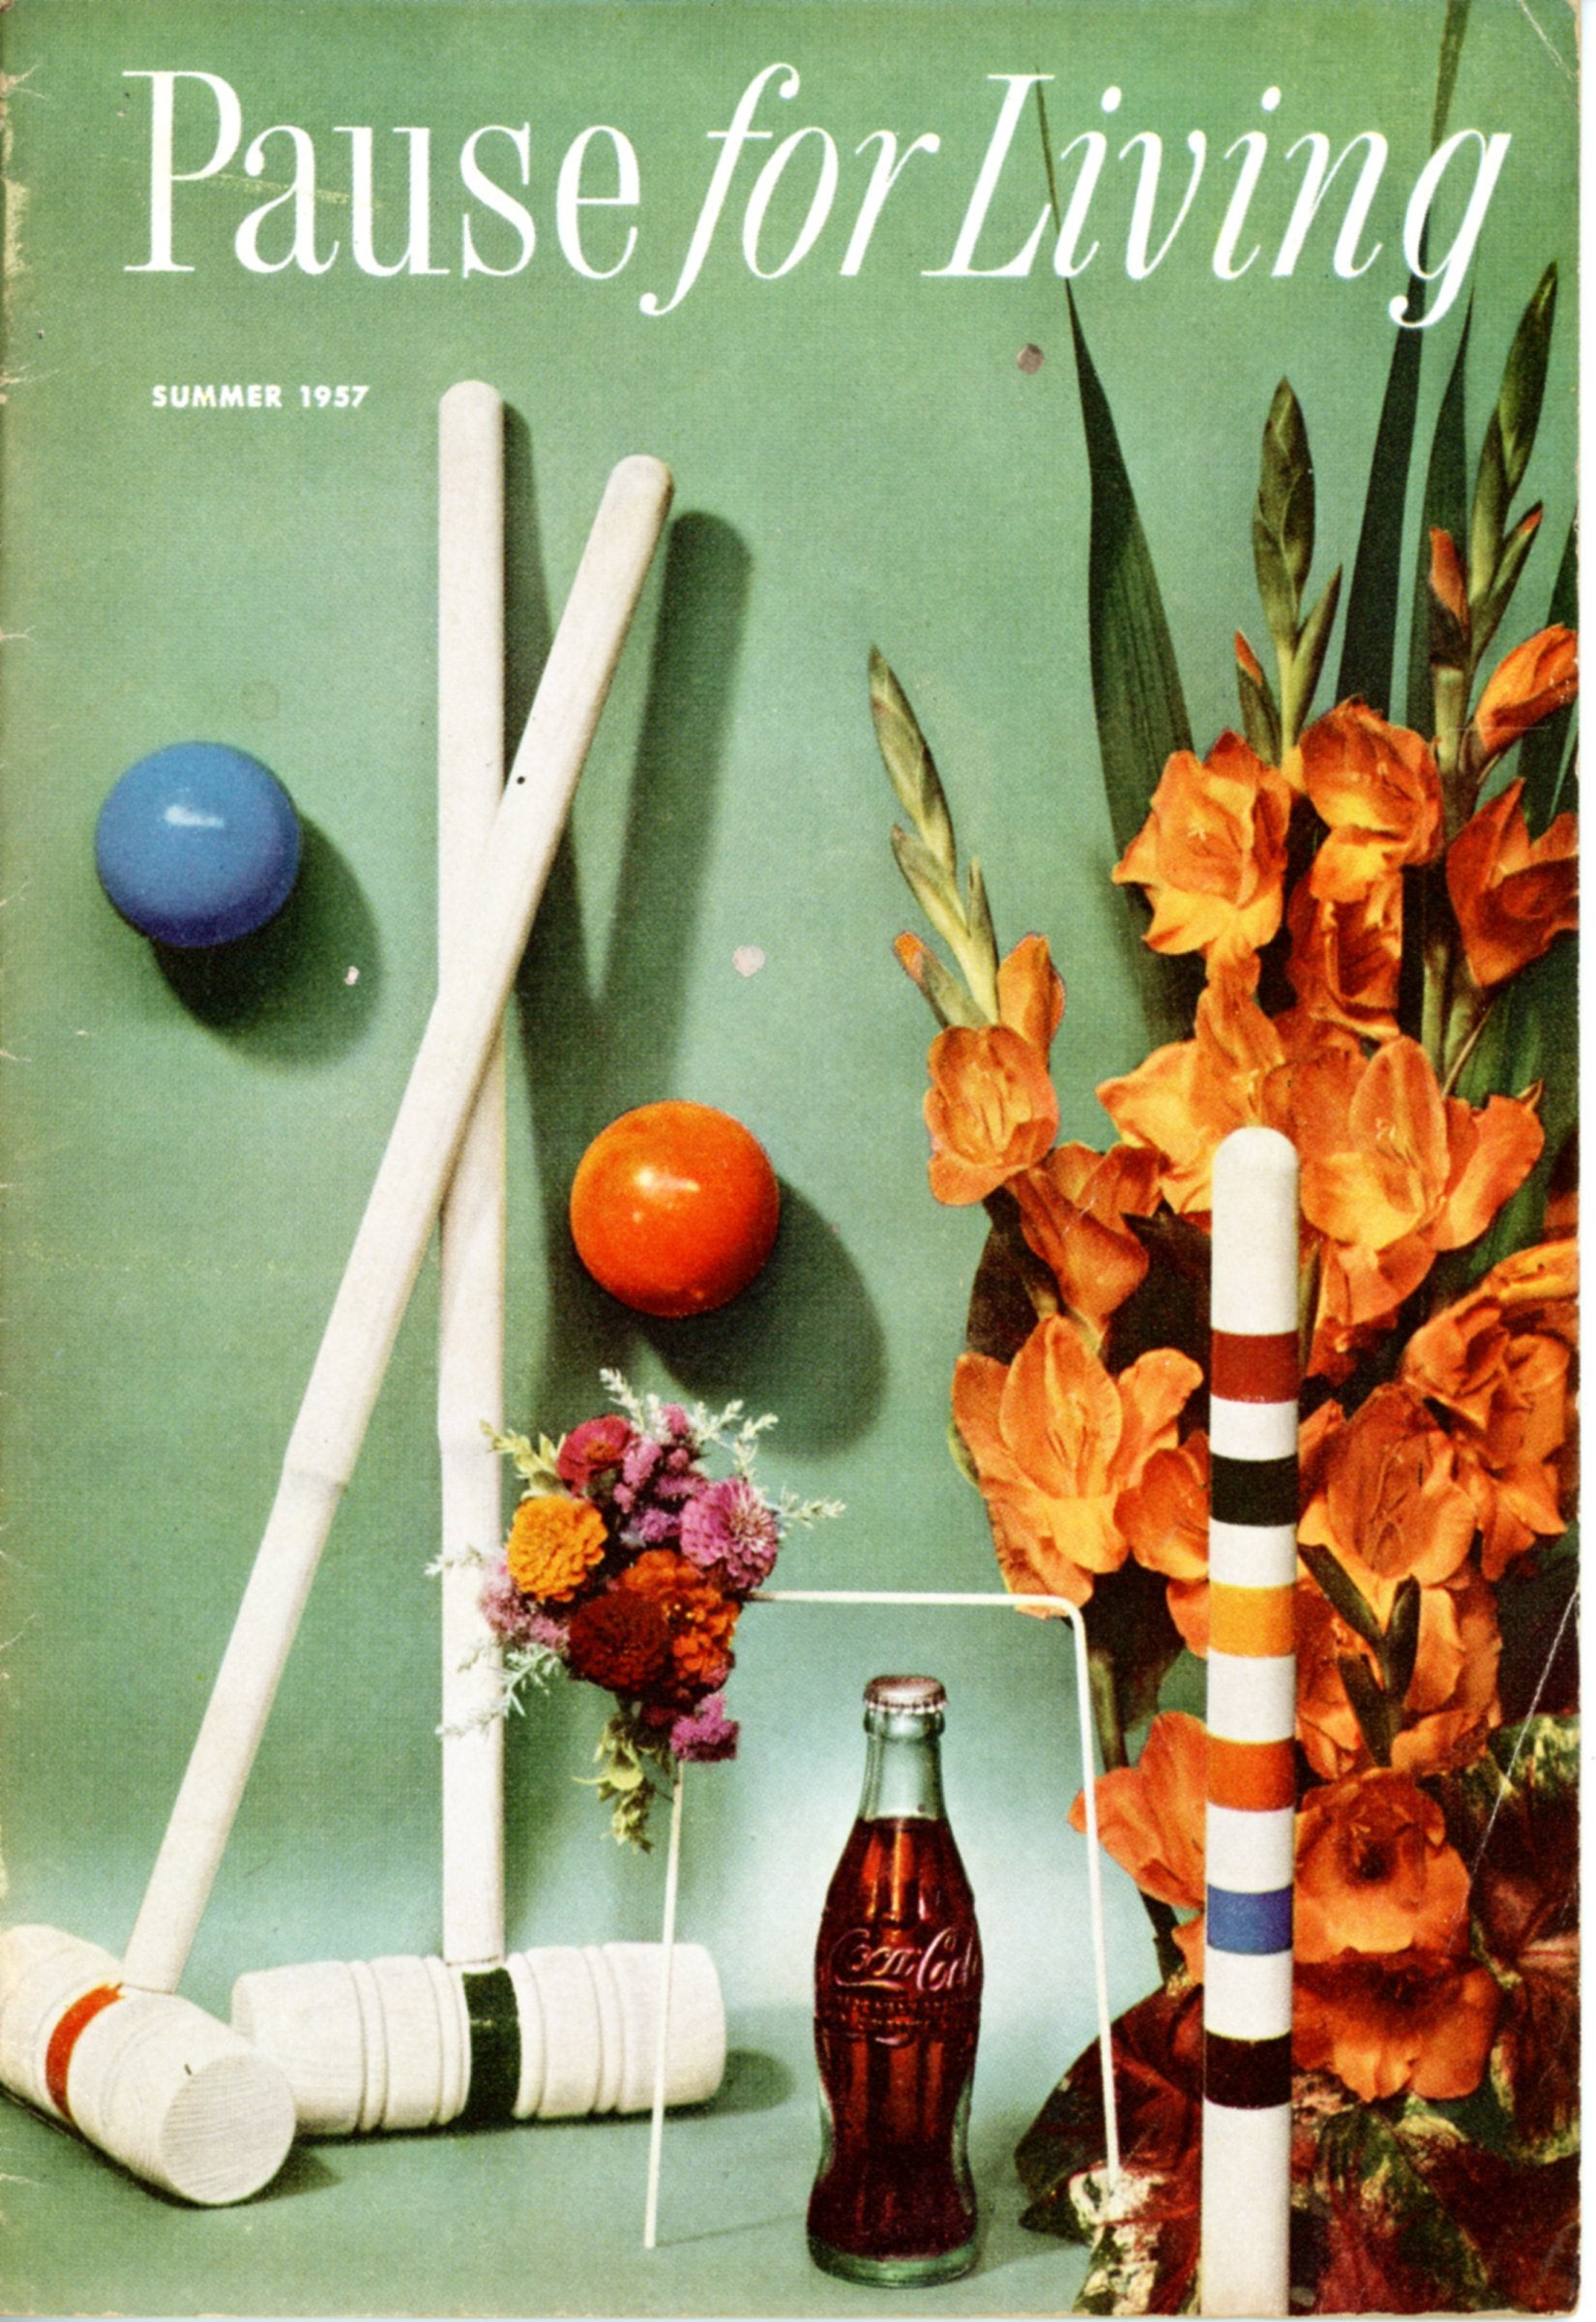 PAUSE FOR LIVING Entertaining Booklets by Coca Cola from 1956 - 1970